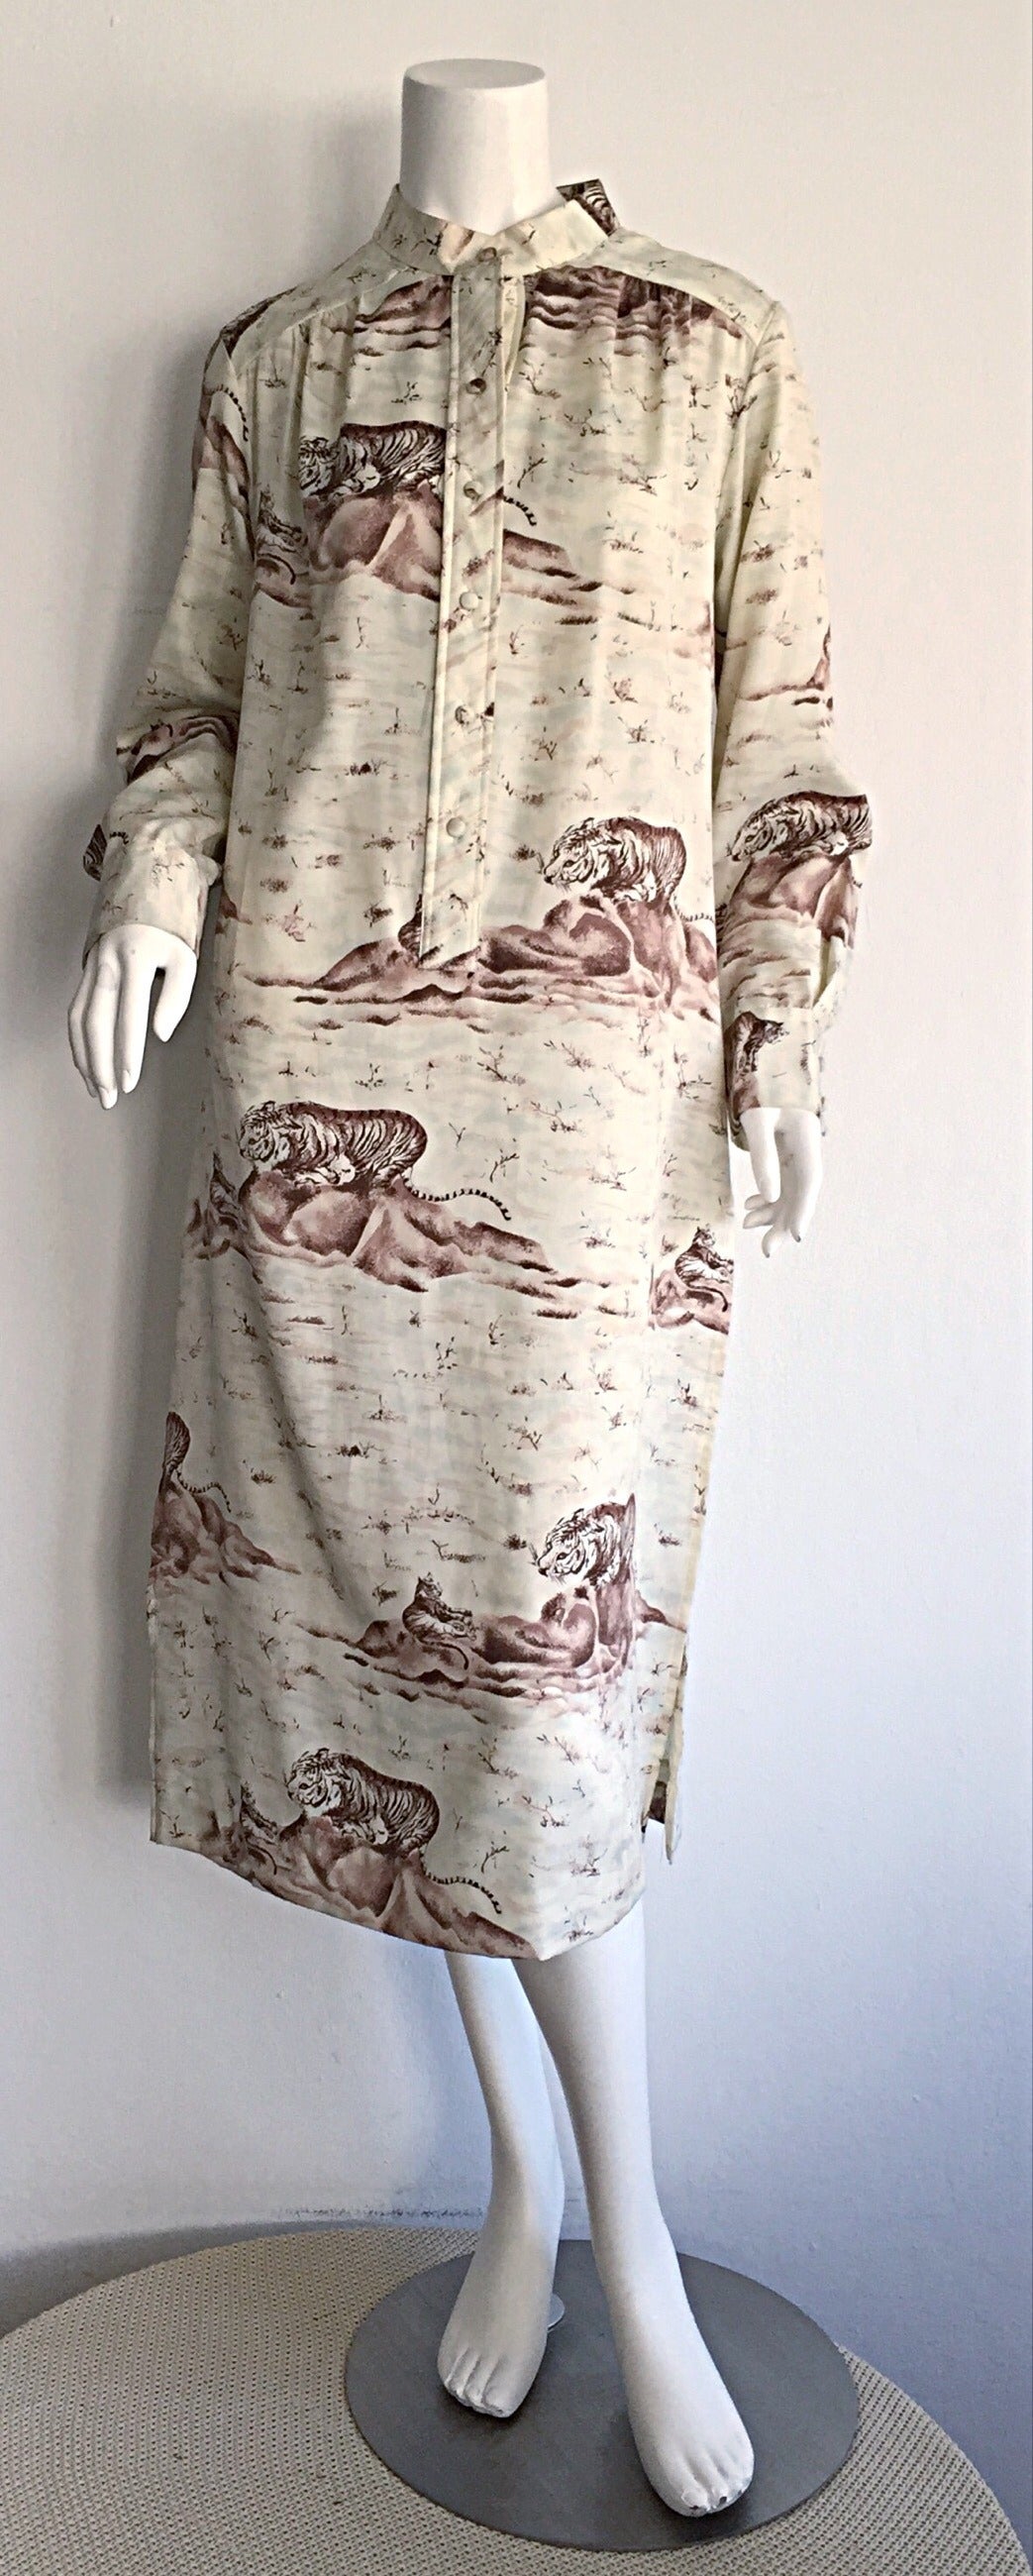 Beige Rare Vintage Jeanne Lanvin Asian / Chinese Themed Tiger Print Tunic Dress